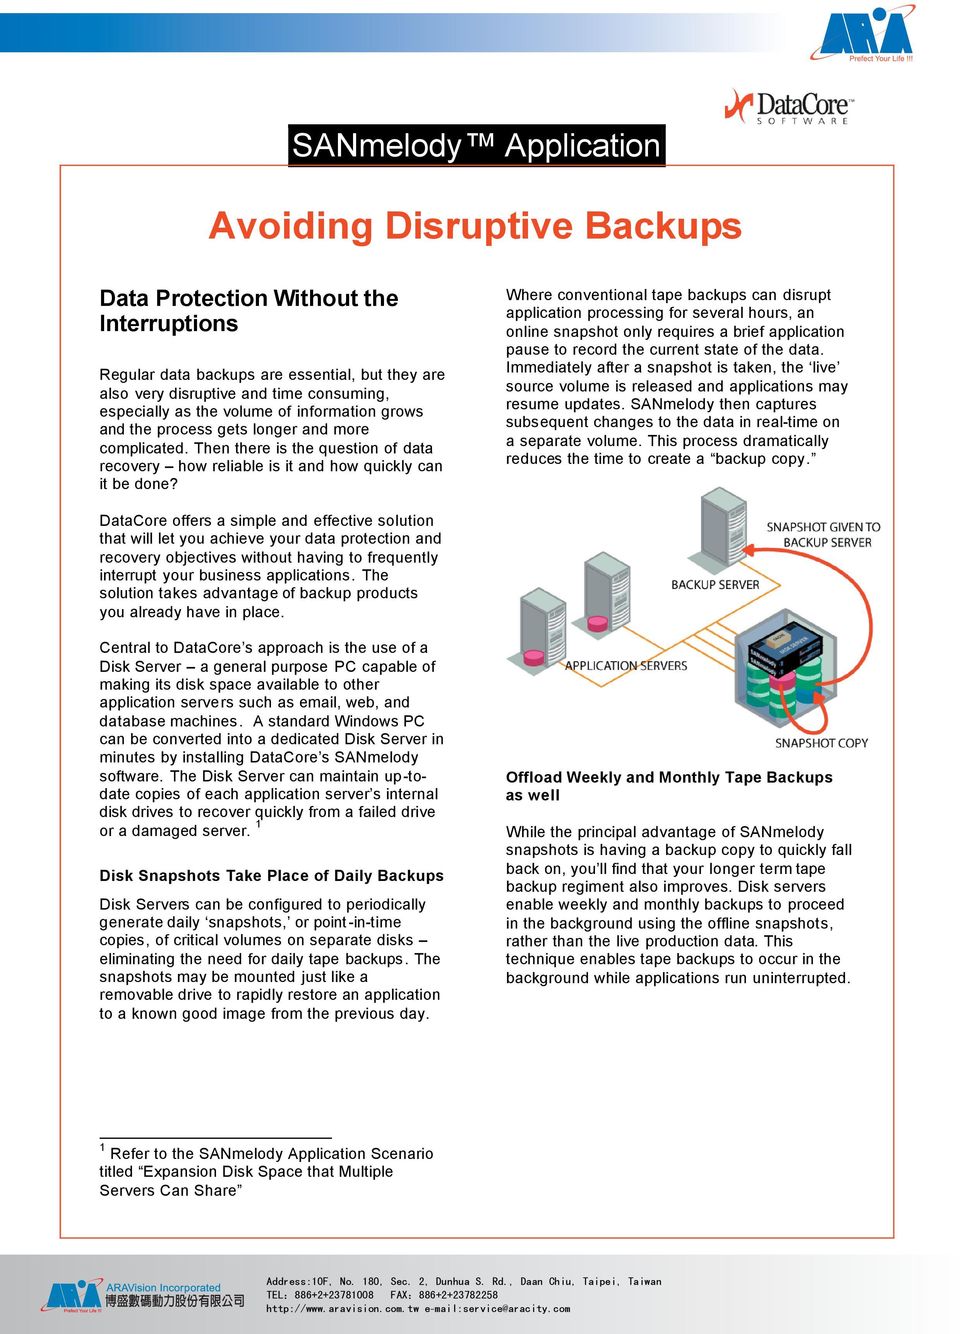 Where conventional tape backups can disrupt application processing for several hours, an online snapshot only requires a brief application pause to record the current state of the data.